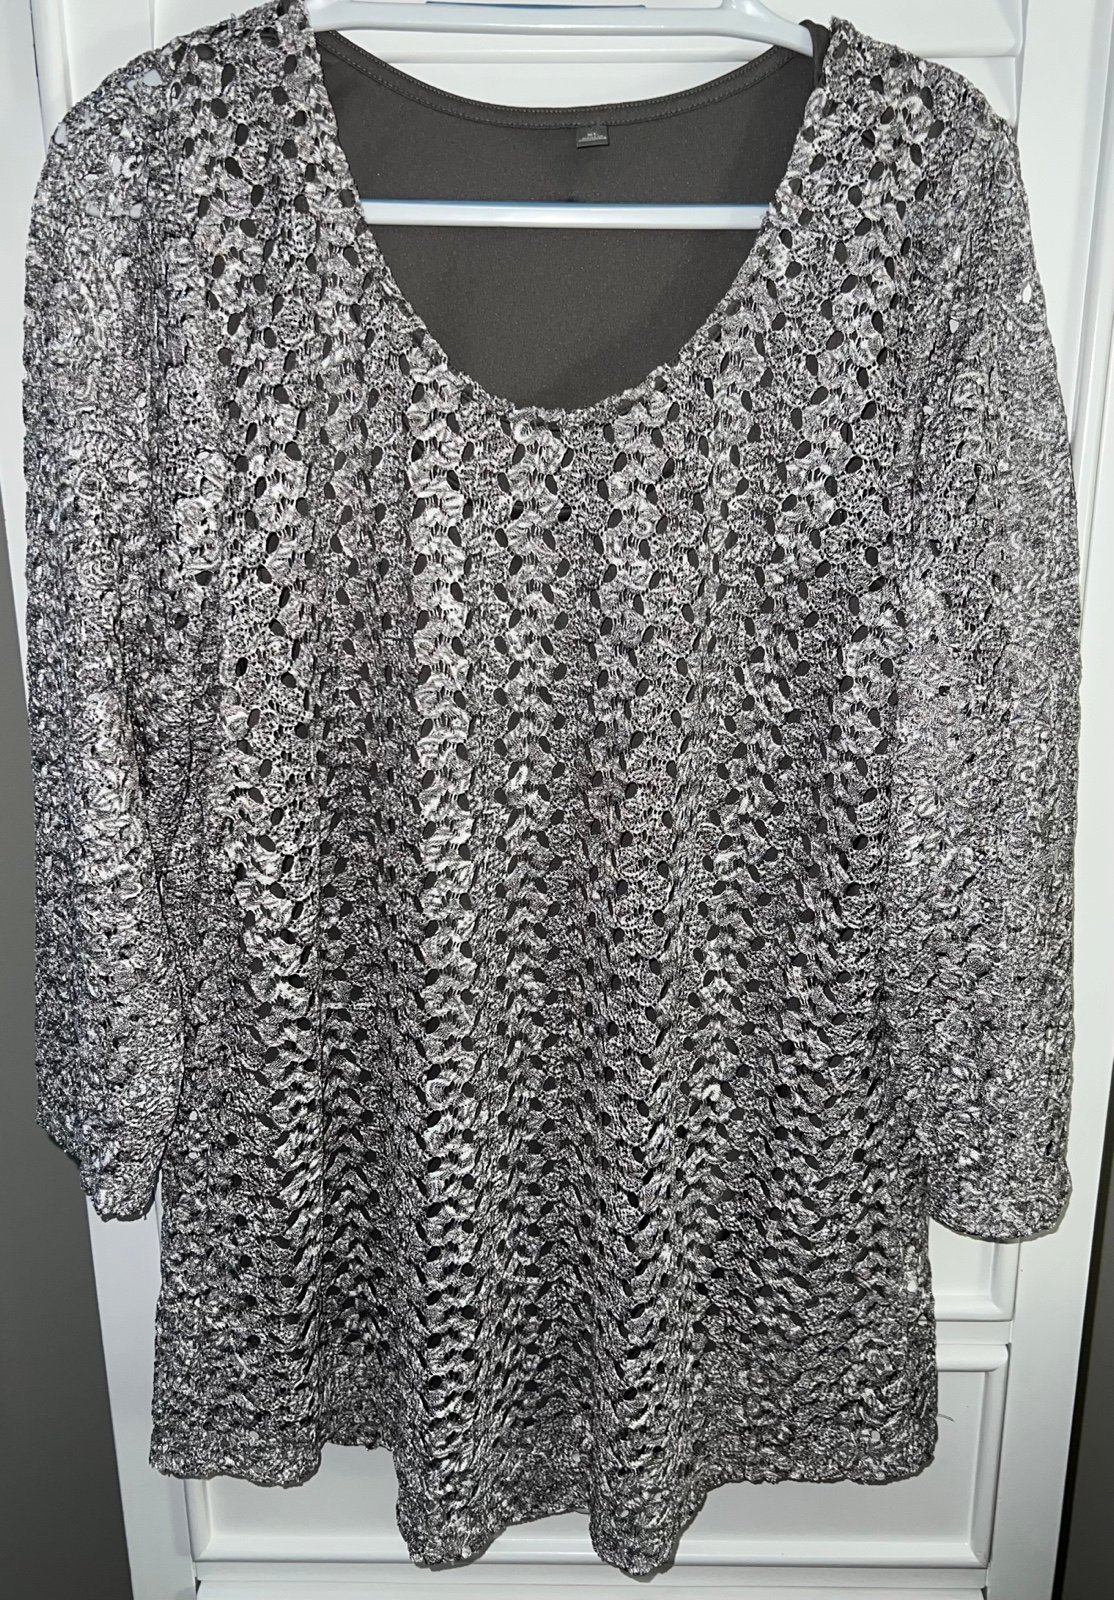 High quality JM Collection grey/white heathered crochet